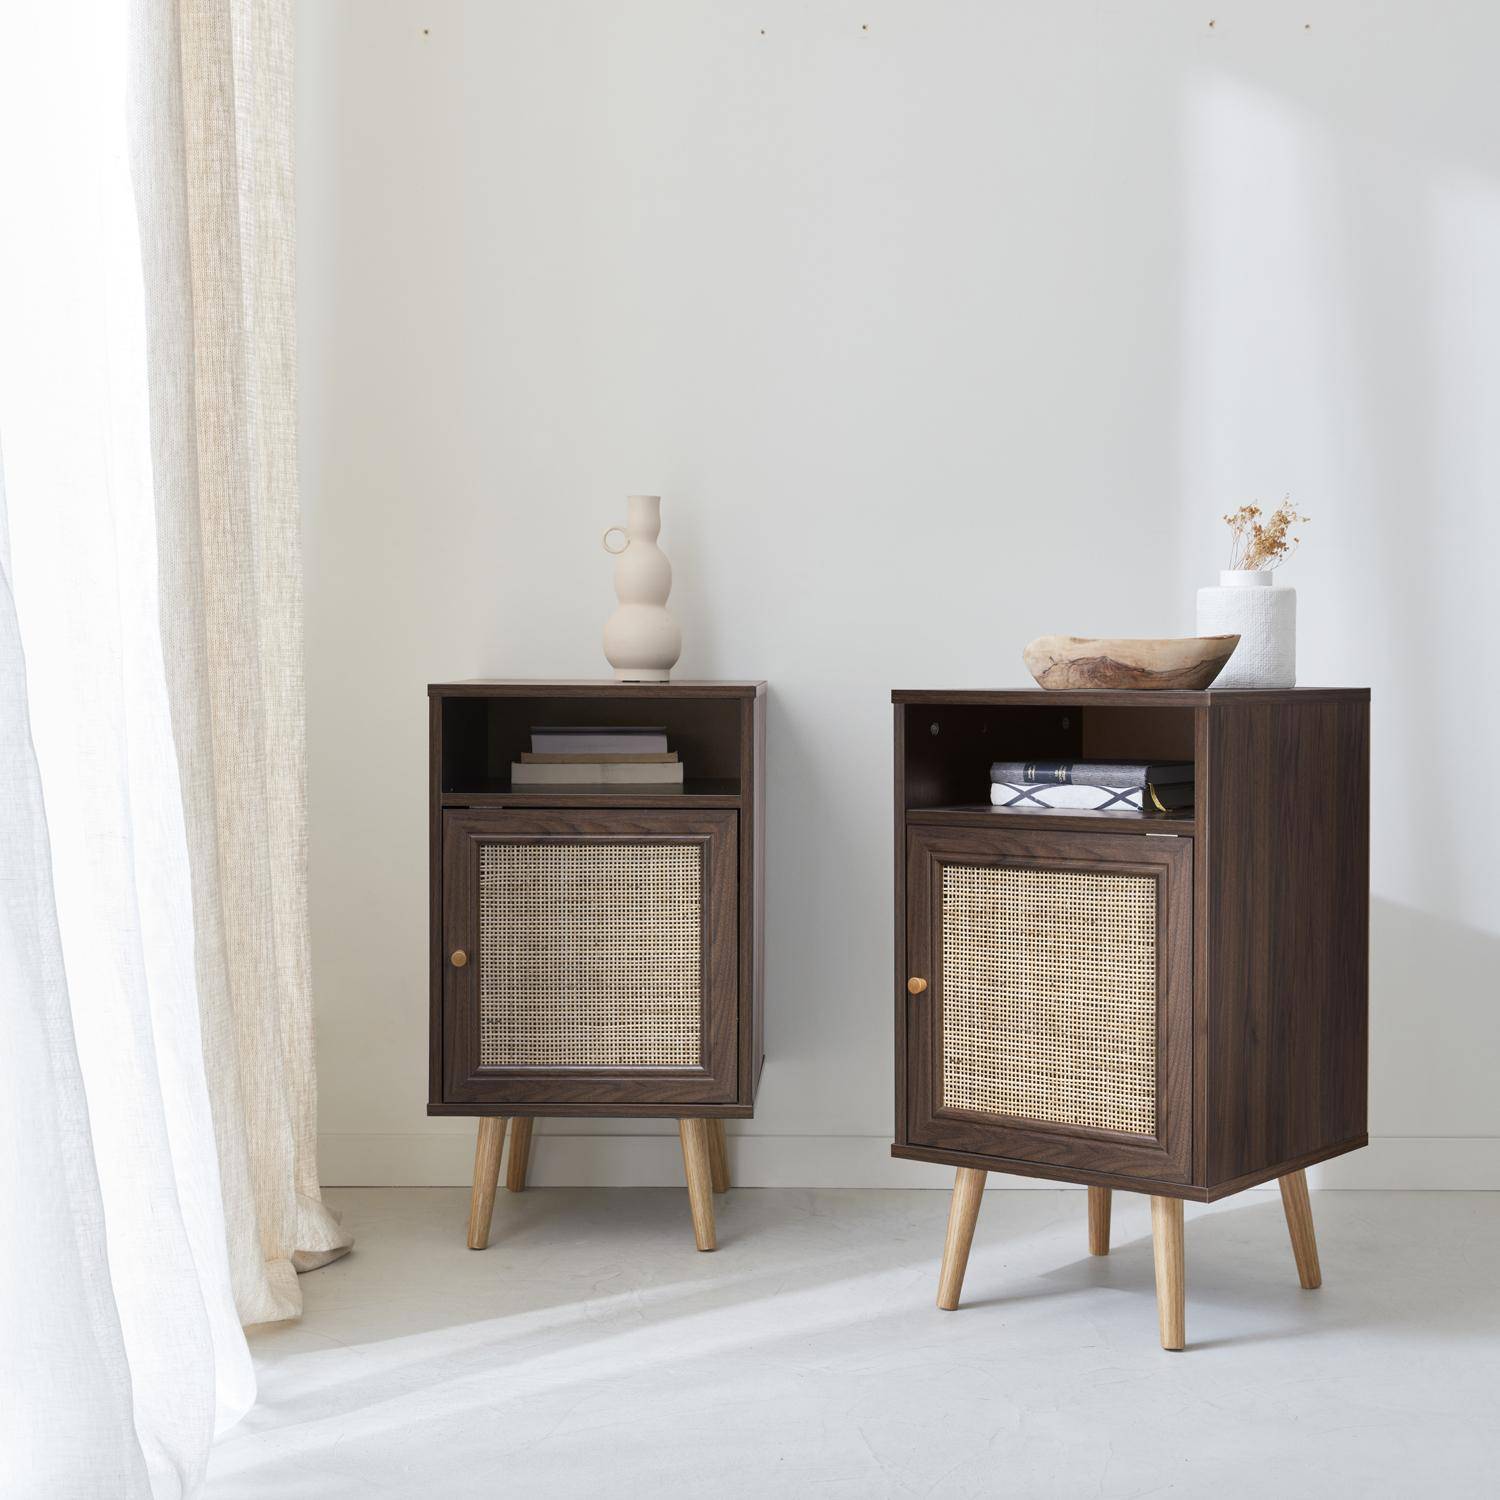 Pair of Scandi-style wood and cane rattan bedside tables with cupboard, 40x39x70cm - Boheme - Dark Wood colour,sweeek,Photo1